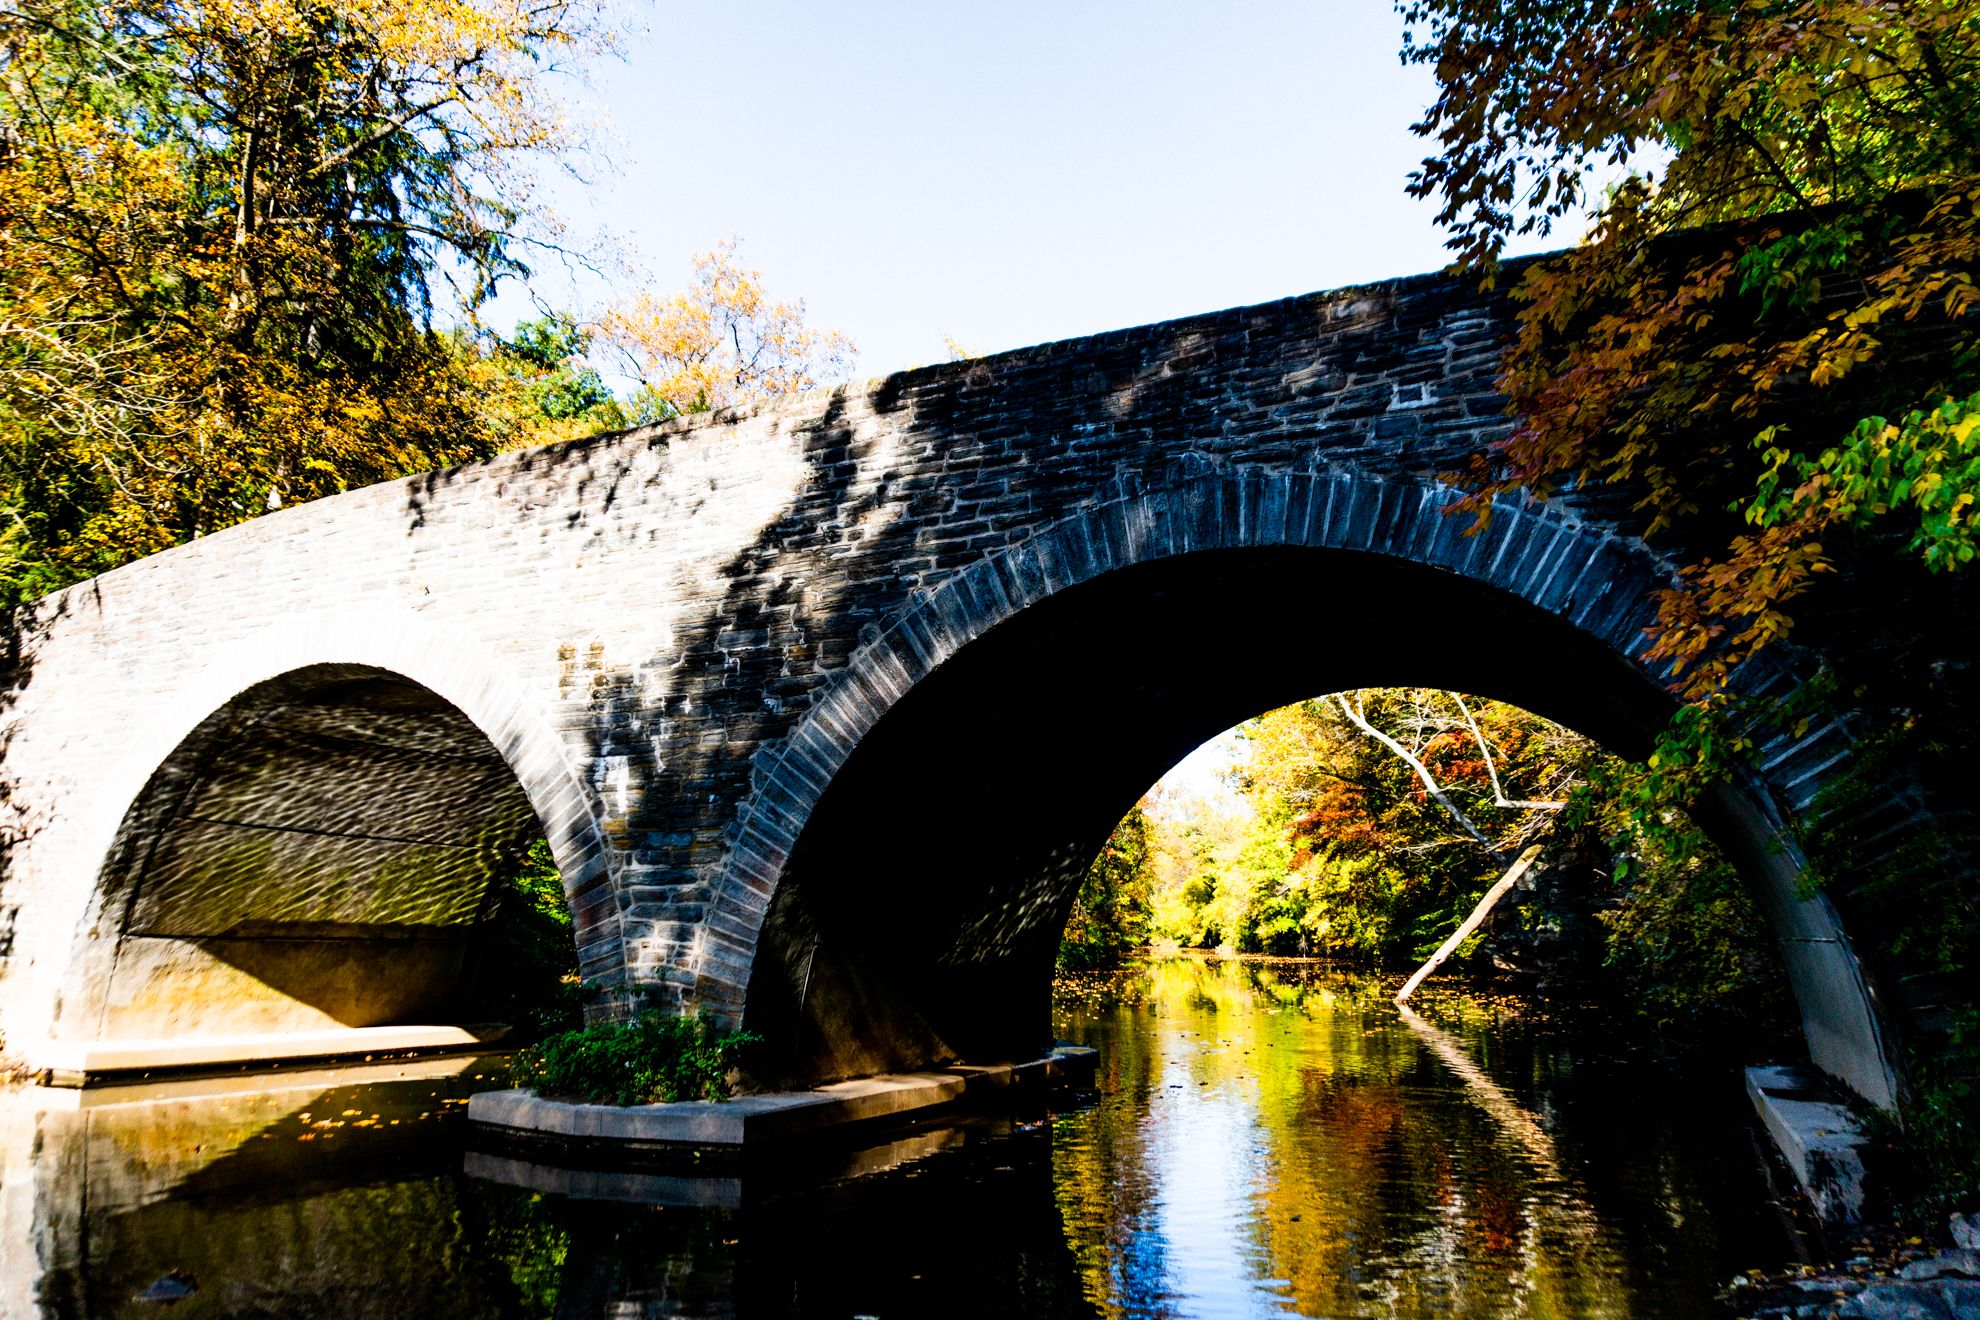 A closer view of the aqueduct footbridge as seen from the banks of the Wissahickon Creek.